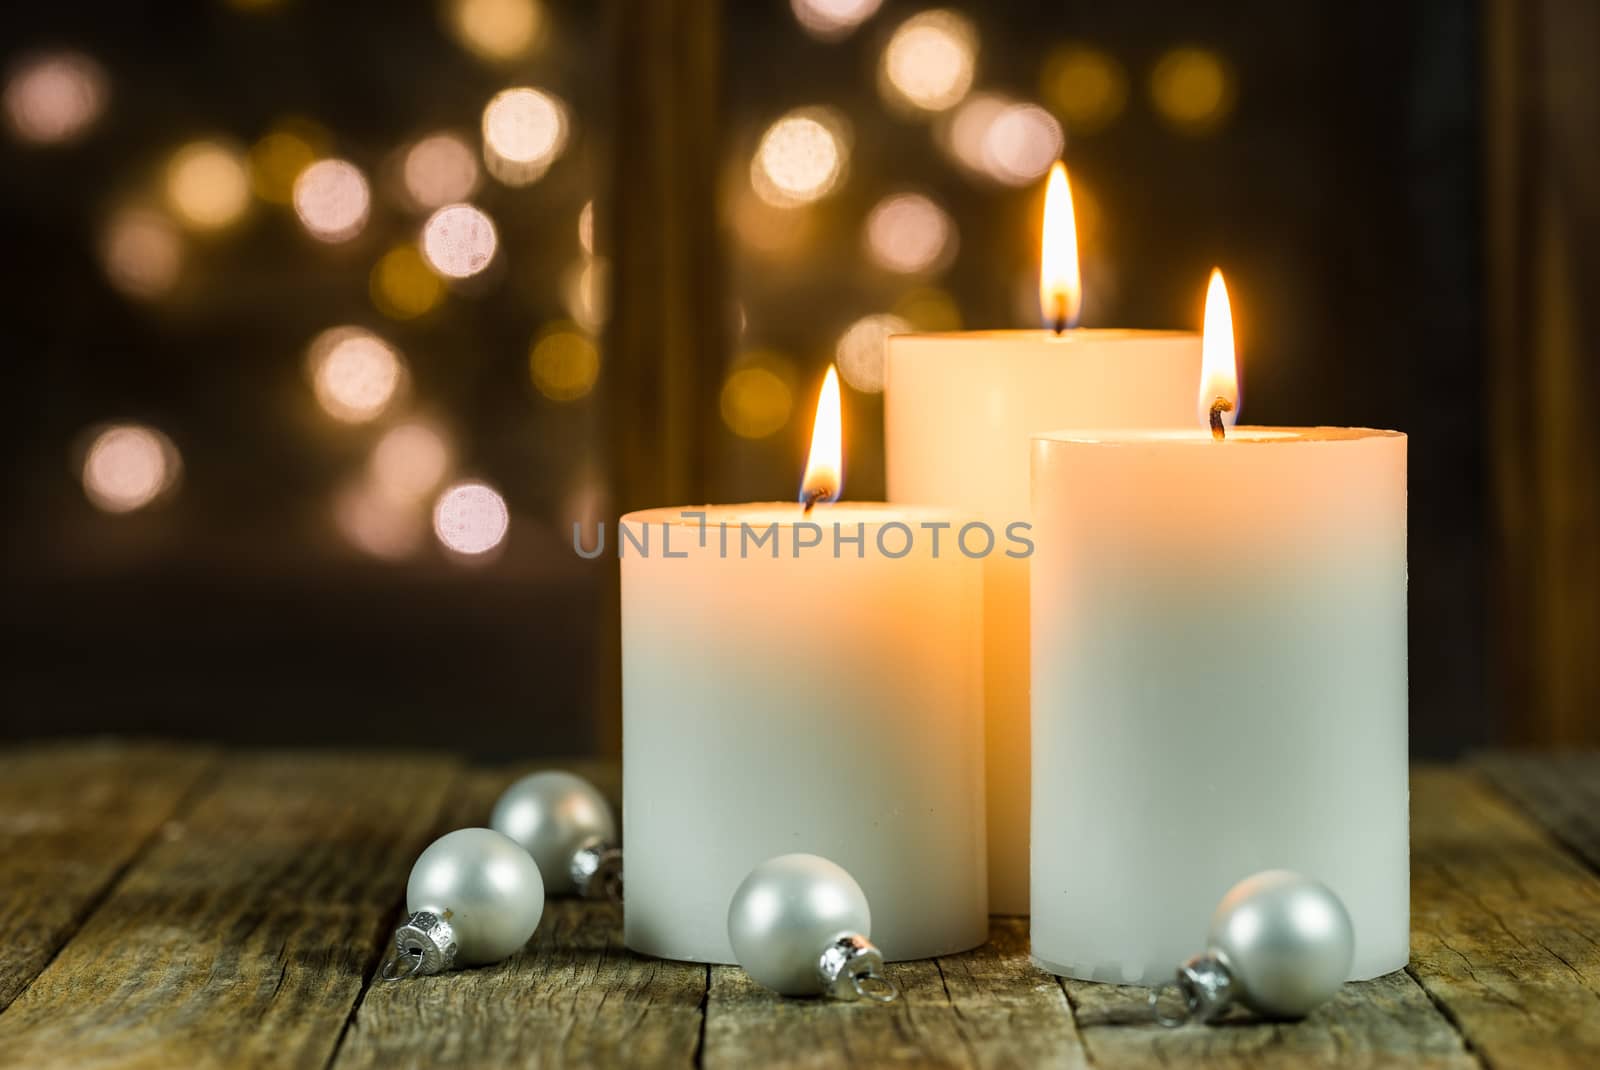 Christmas or Advent candles on wooden table in front of window lights background